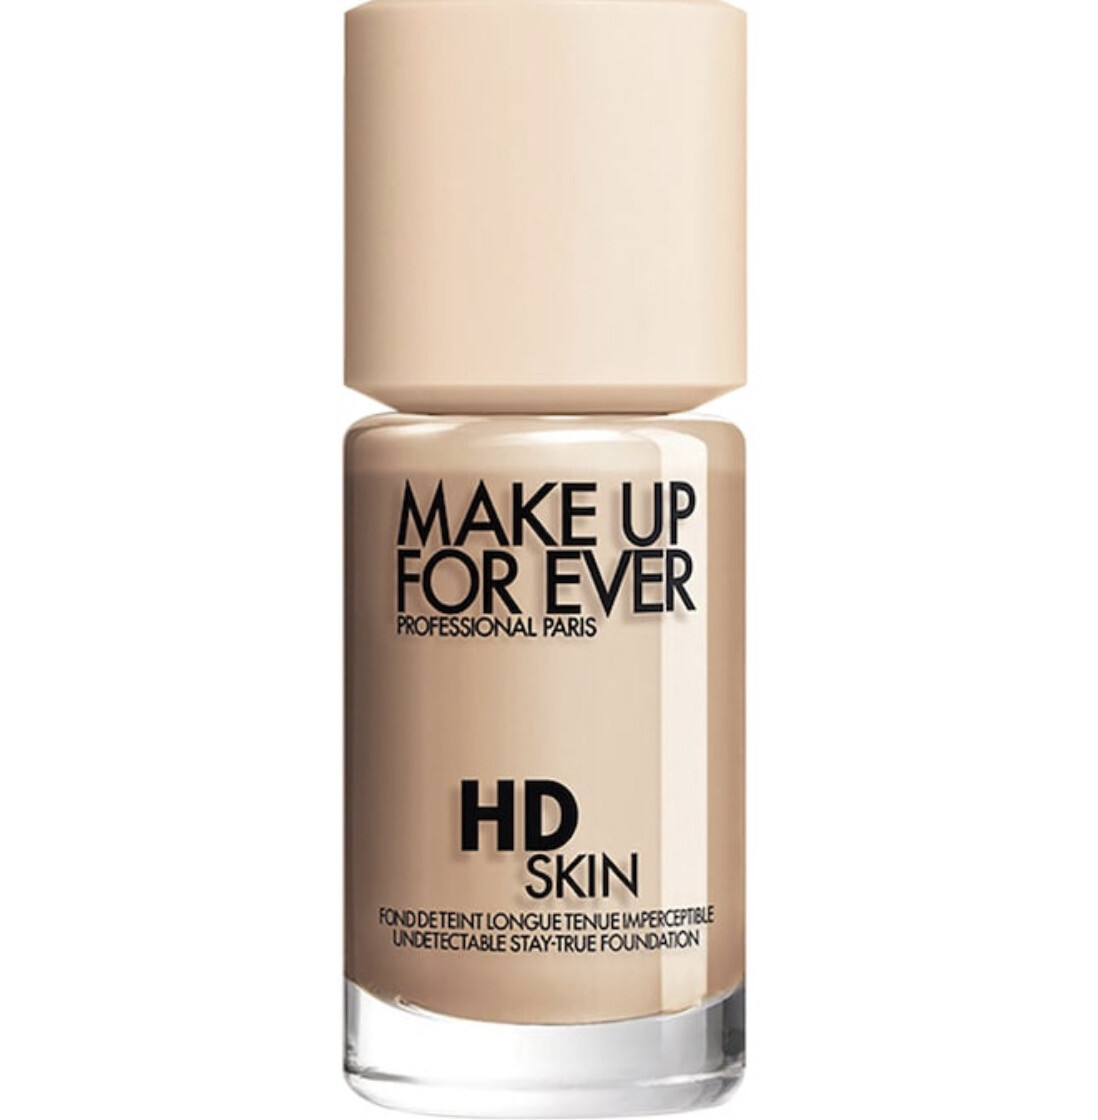 Make Up For Ever - HD Skin Undetectable Longwear Foundation | 1Y18 Warm Cashew - for light skin tones with yellow undertones